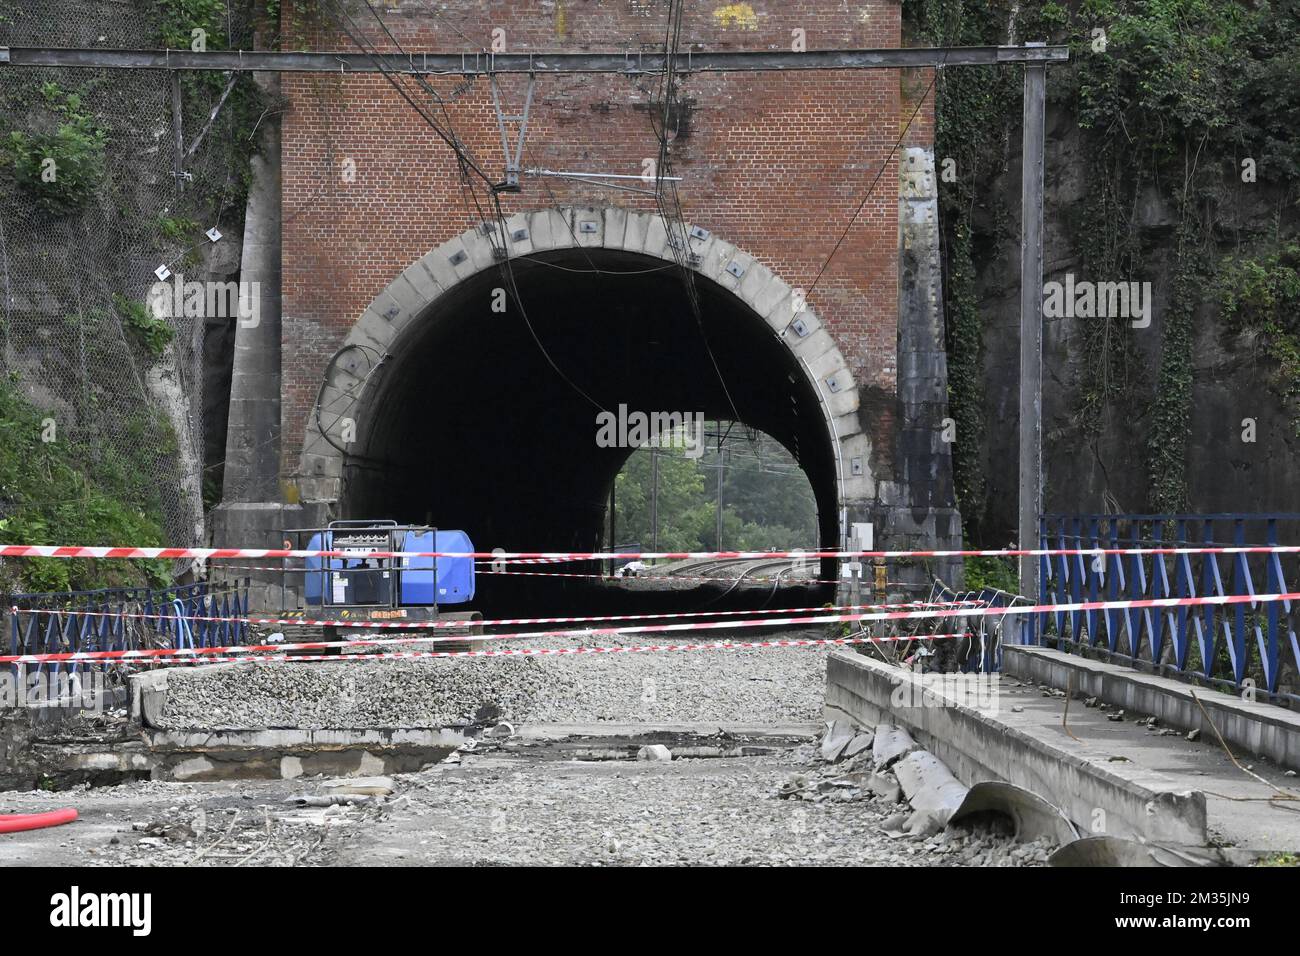 Illustration shows a visit to a site where workers are repairing damaged train tracks in Pepinster, Monday 23 August 2021. Last month's floods devastated large areas in the region. BELGA PHOTO ERIC LALMAND  Stock Photo